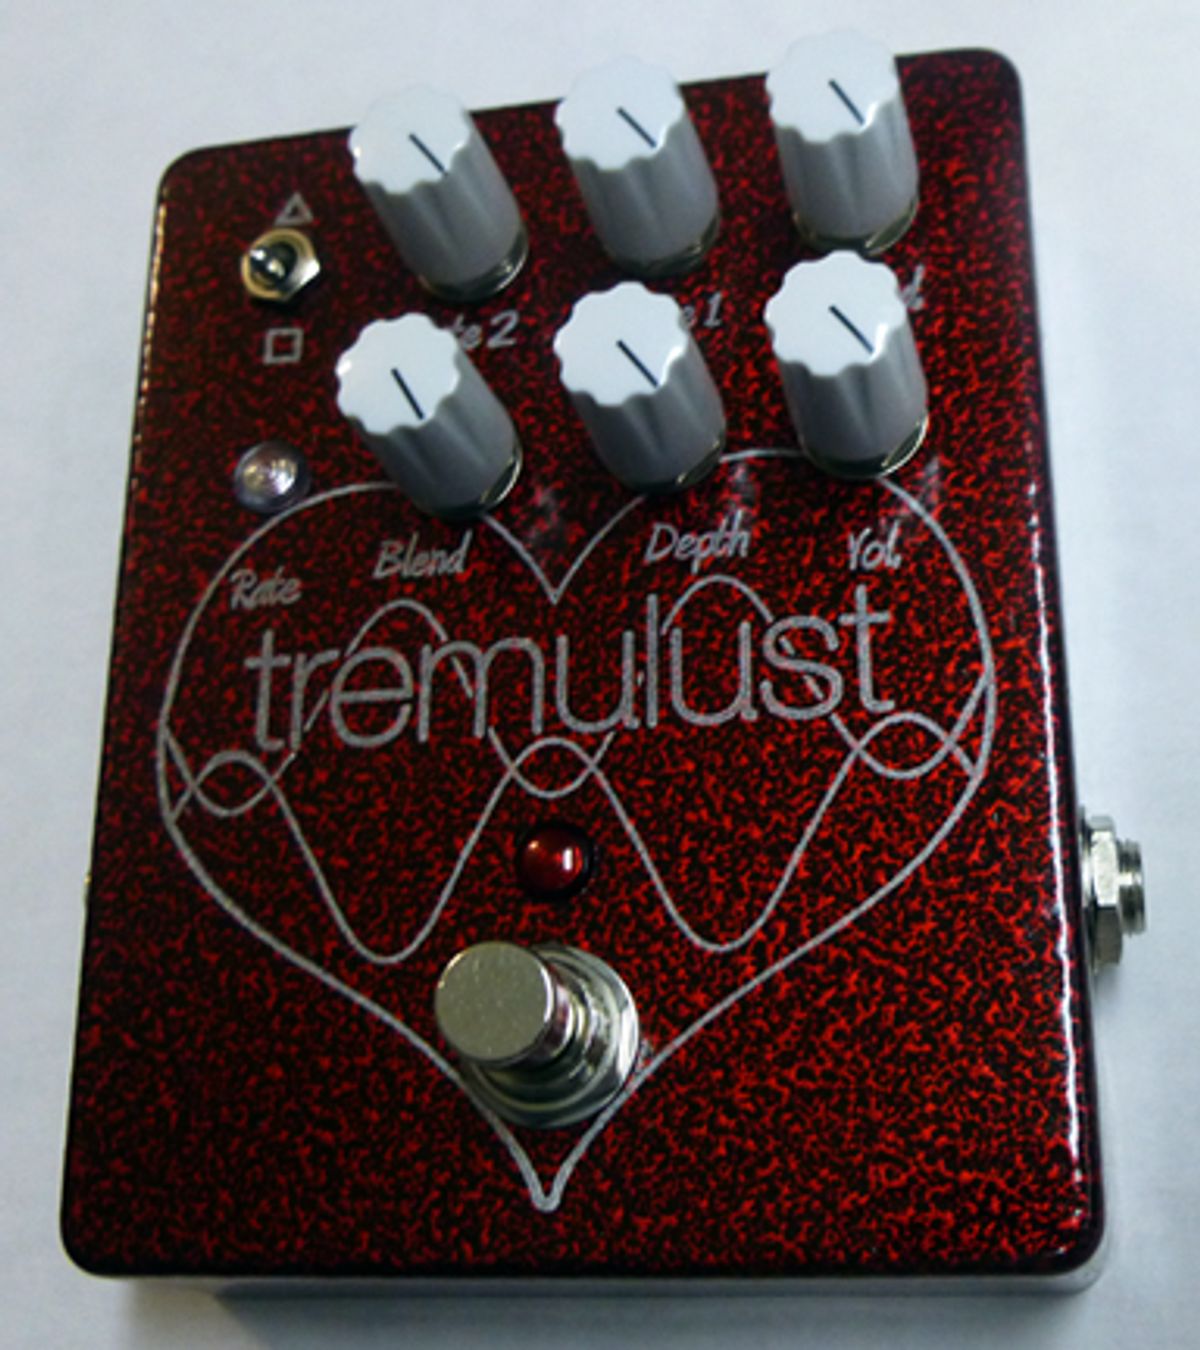 FuzzHugger Effects Releases the Tremulust